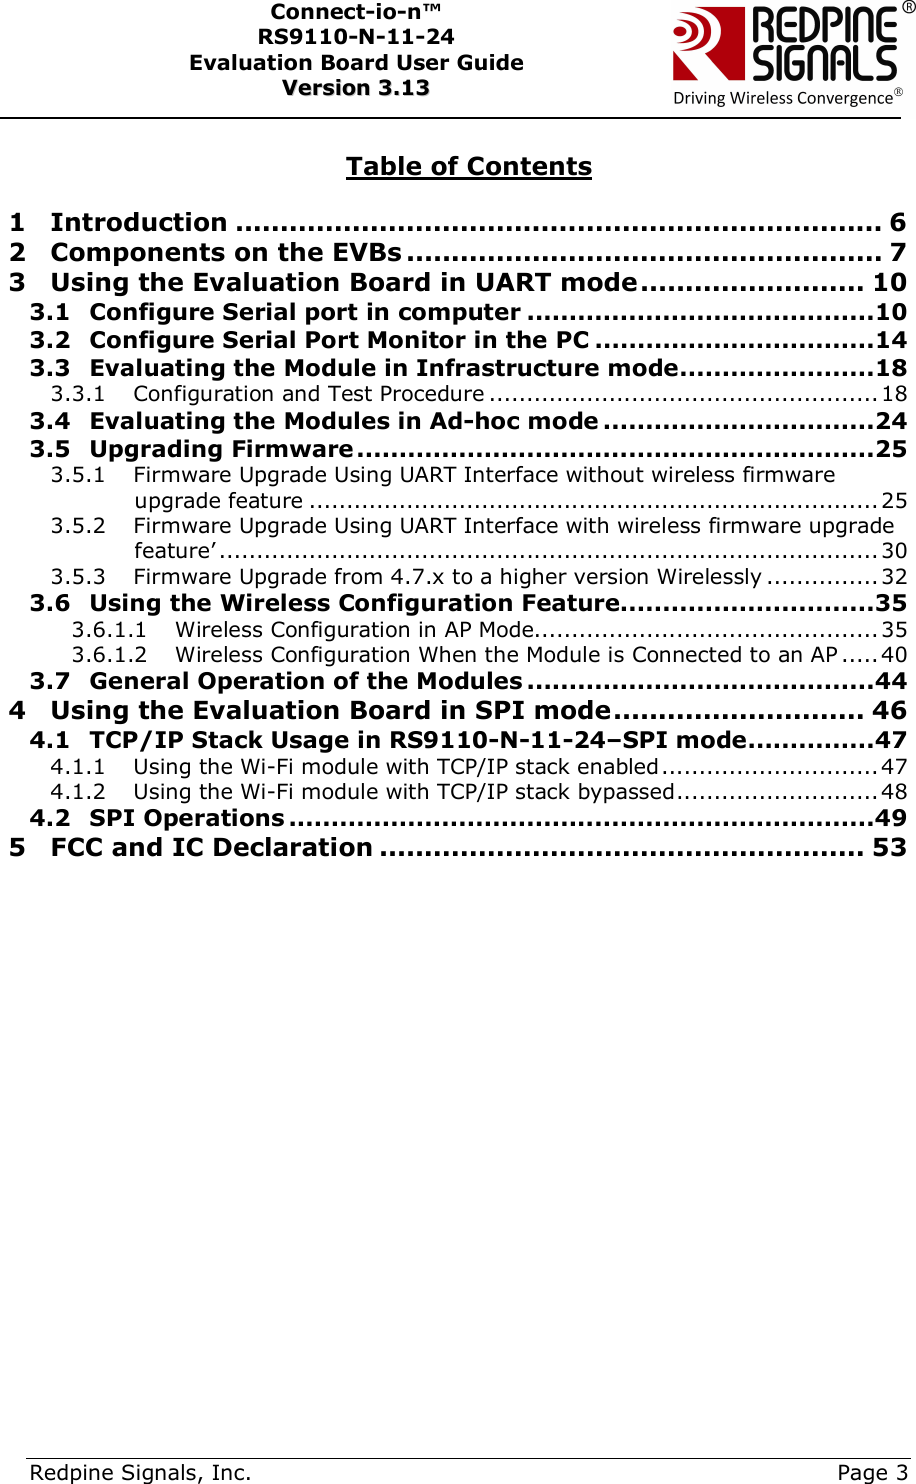      Redpine Signals, Inc.     Page 3 Connect-io-n™ RS9110-N-11-24  Evaluation Board User Guide  VVeerrssiioonn  33..1133     Table of Contents  1 Introduction ........................................................................ 6 2 Components on the EVBs ..................................................... 7 3 Using the Evaluation Board in UART mode ......................... 10 3.1 Configure Serial port in computer .........................................10 3.2 Configure Serial Port Monitor in the PC .................................14 3.3 Evaluating the Module in Infrastructure mode .......................18 3.3.1 Configuration and Test Procedure .................................................... 18 3.4 Evaluating the Modules in Ad-hoc mode ................................24 3.5 Upgrading Firmware .............................................................25 3.5.1 Firmware Upgrade Using UART Interface without wireless firmware upgrade feature ............................................................................ 25 3.5.2 Firmware Upgrade Using UART Interface with wireless firmware upgrade feature’ ........................................................................................ 30 3.5.3 Firmware Upgrade from 4.7.x to a higher version Wirelessly ............... 32 3.6 Using the Wireless Configuration Feature..............................35 3.6.1.1 Wireless Configuration in AP Mode.............................................. 35 3.6.1.2 Wireless Configuration When the Module is Connected to an AP ..... 40 3.7 General Operation of the Modules .........................................44 4 Using the Evaluation Board in SPI mode ............................ 46 4.1 TCP/IP Stack Usage in RS9110-N-11-24–SPI mode ...............47 4.1.1 Using the Wi-Fi module with TCP/IP stack enabled ............................. 47 4.1.2 Using the Wi-Fi module with TCP/IP stack bypassed ........................... 48 4.2 SPI Operations .....................................................................49 5 FCC and IC Declaration ...................................................... 53 